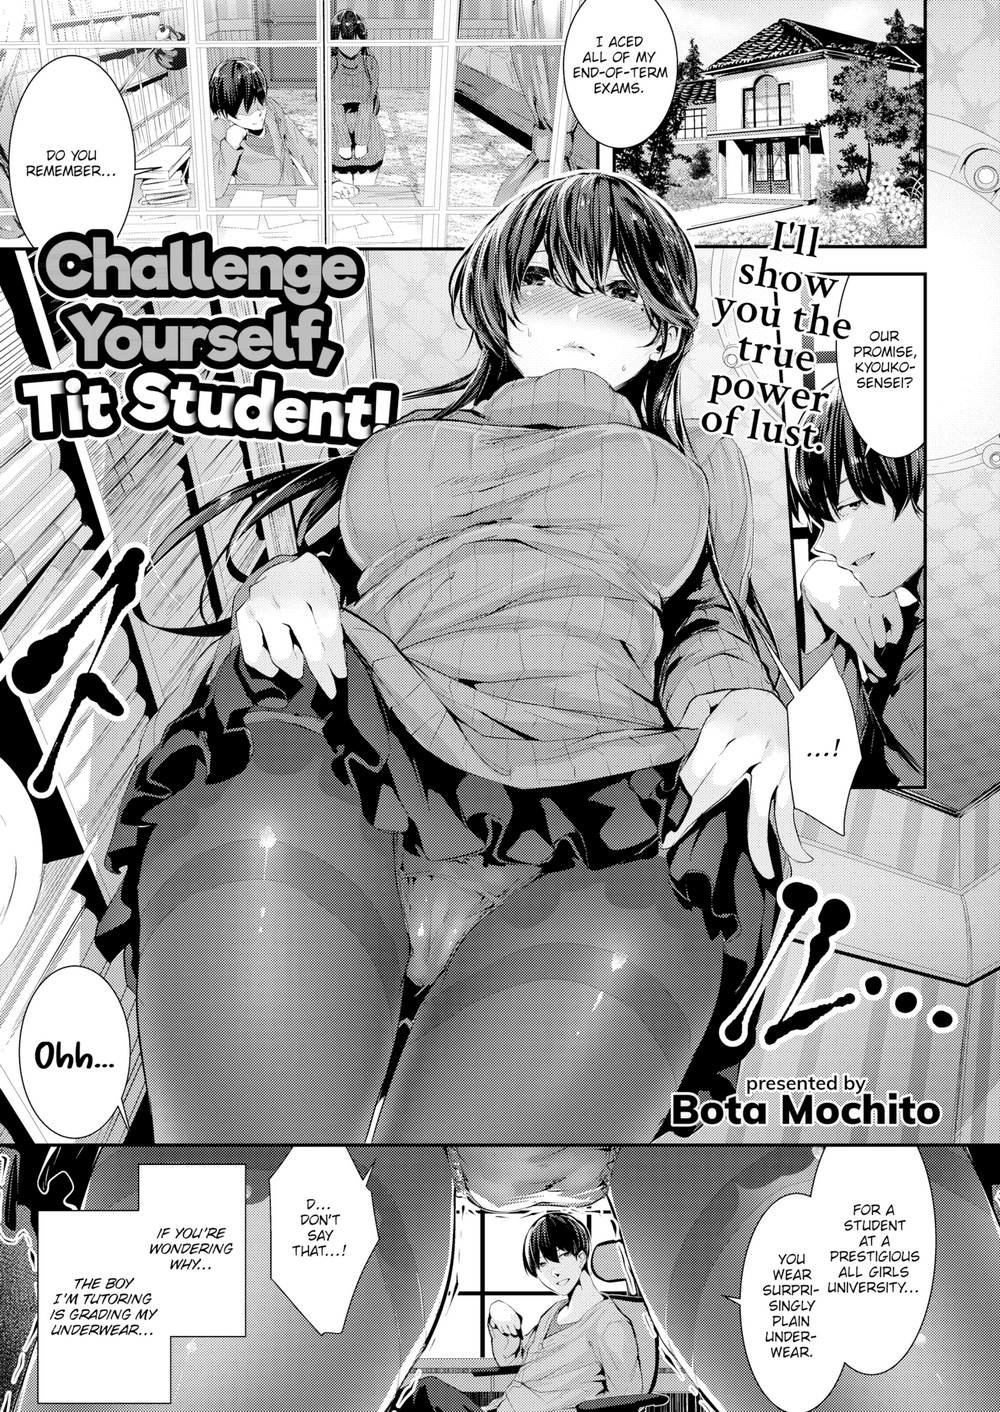 Challenge Yourself Tit Student! - 0